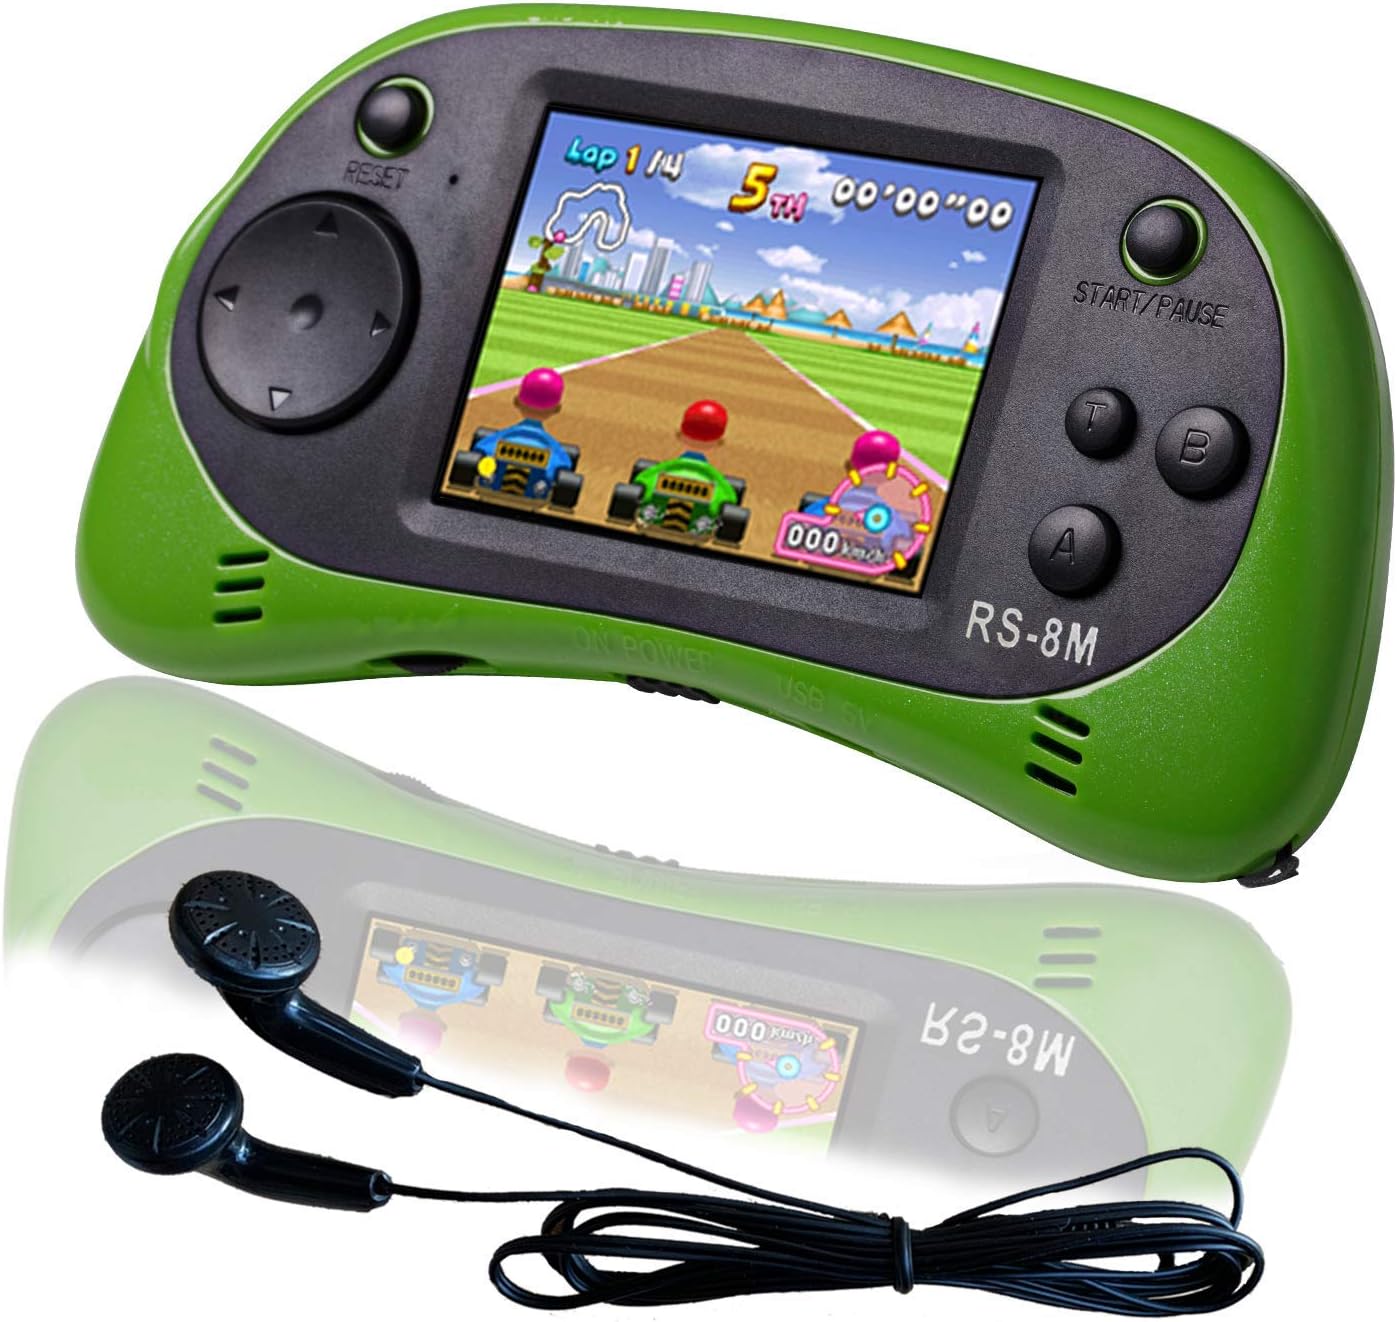 EASEGMER 16 Bit Kids Handheld Games Built-in 220 HD Video Games, 2.5 Inch Portable Game Player with Headphones - Best Travel Electronic Toys Gifts for Toddlers Age 3-10 Years Old Children (Blue)